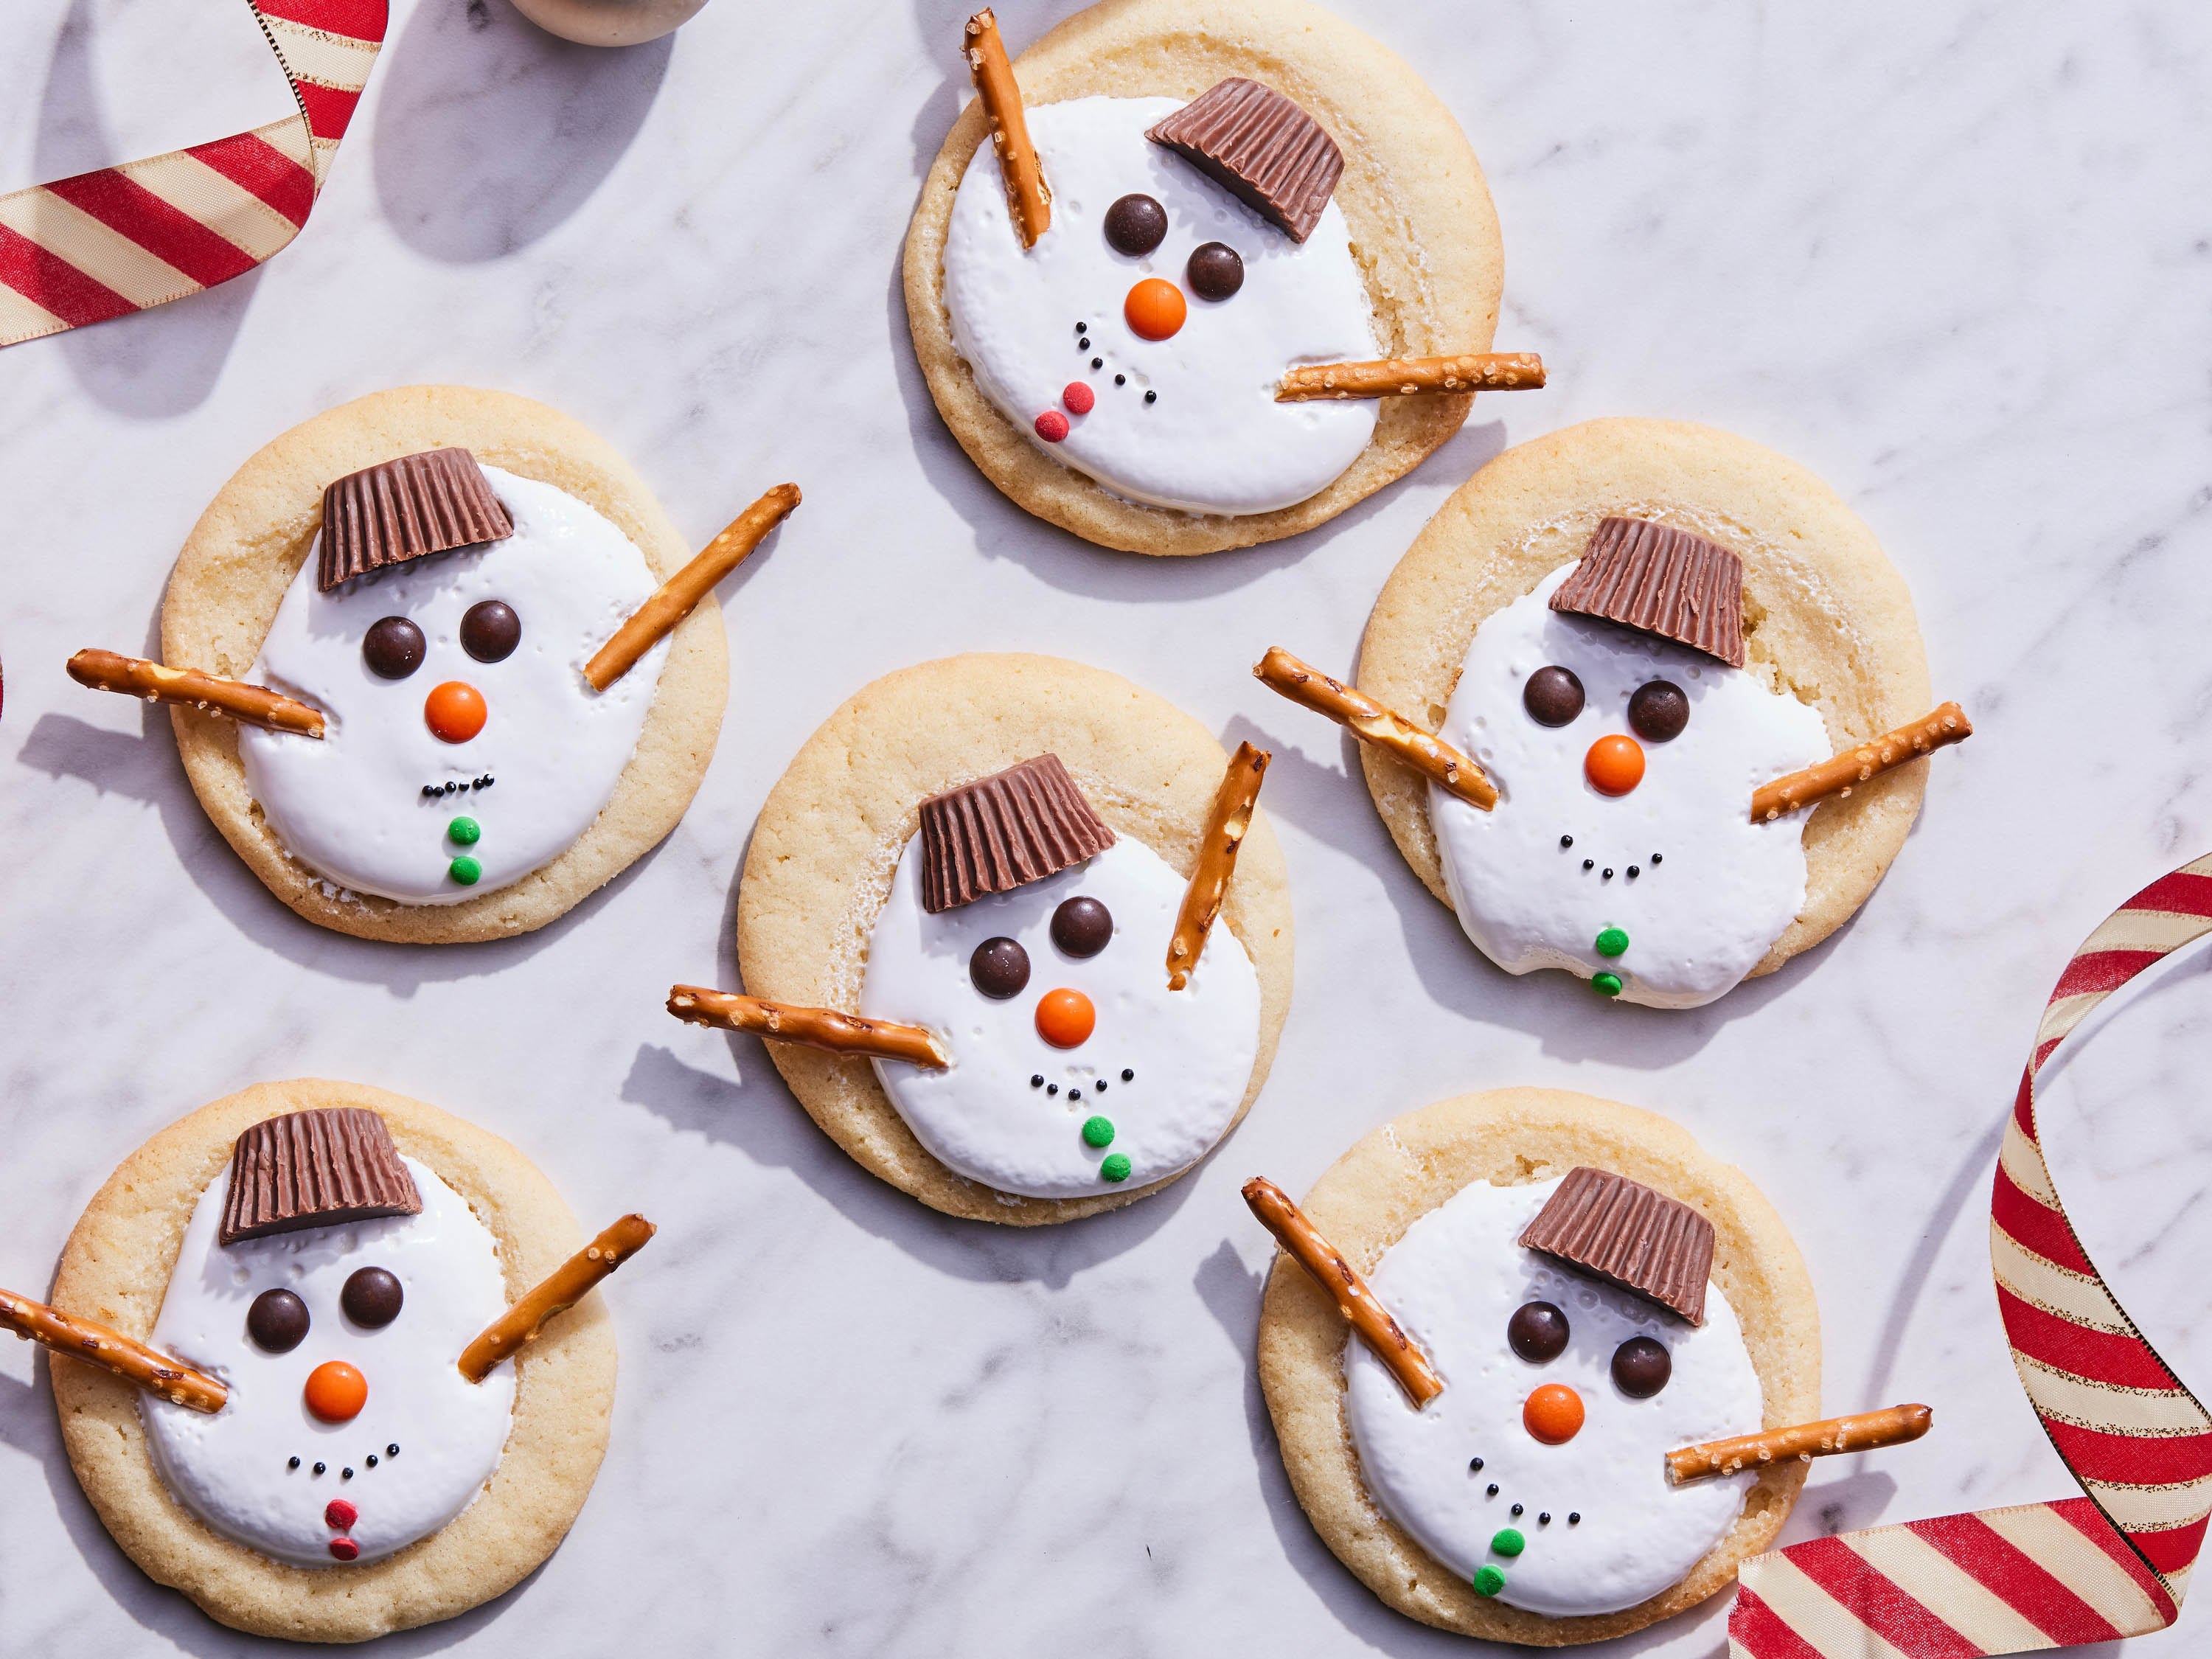 Melting Snowman Sugar Cookies - Life's Little Sweets